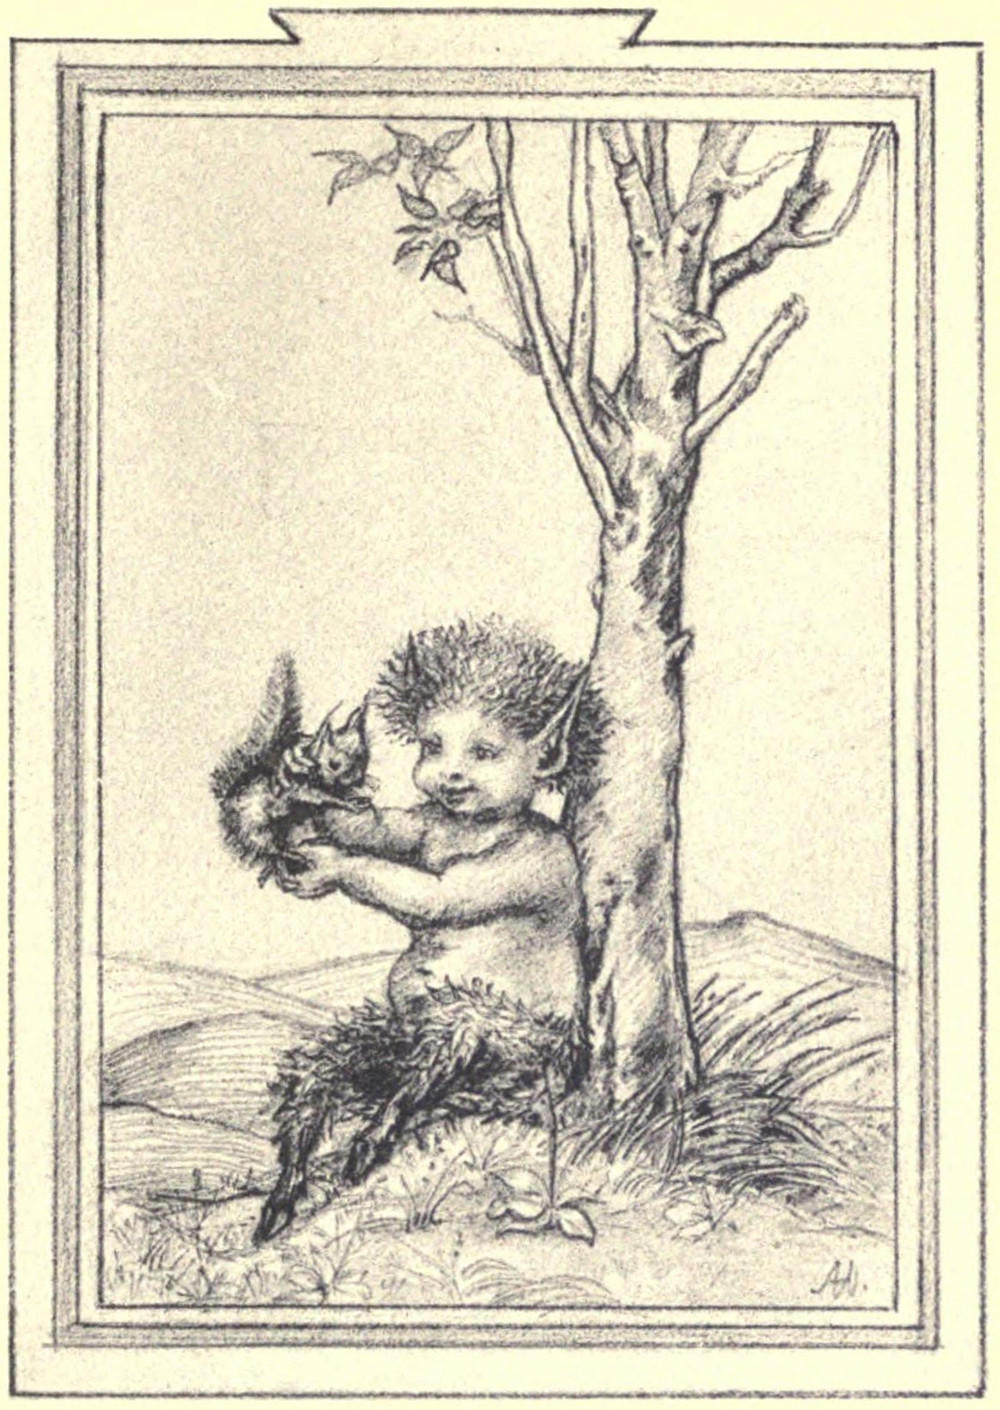 Illustration: One child held a squirrel between his hands